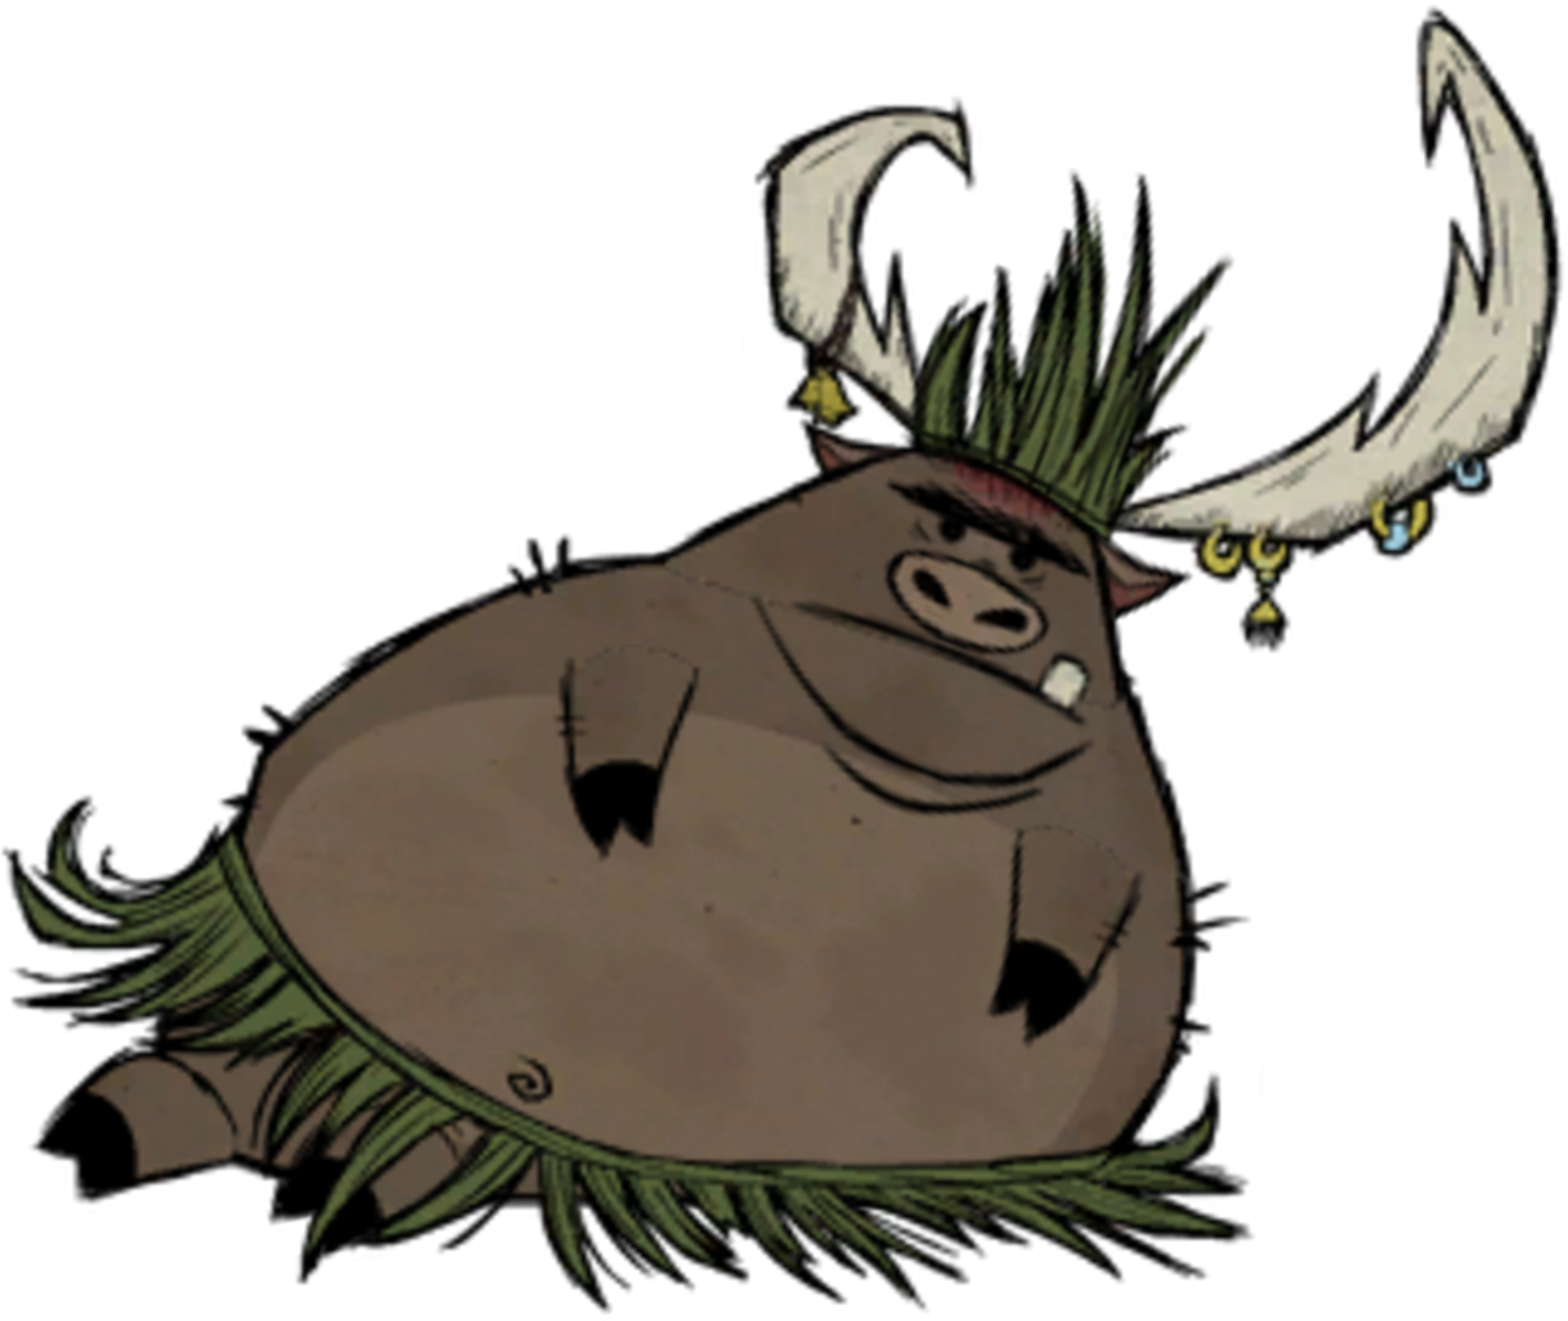 Don't Starve And Terraria Are Swapping Bosses